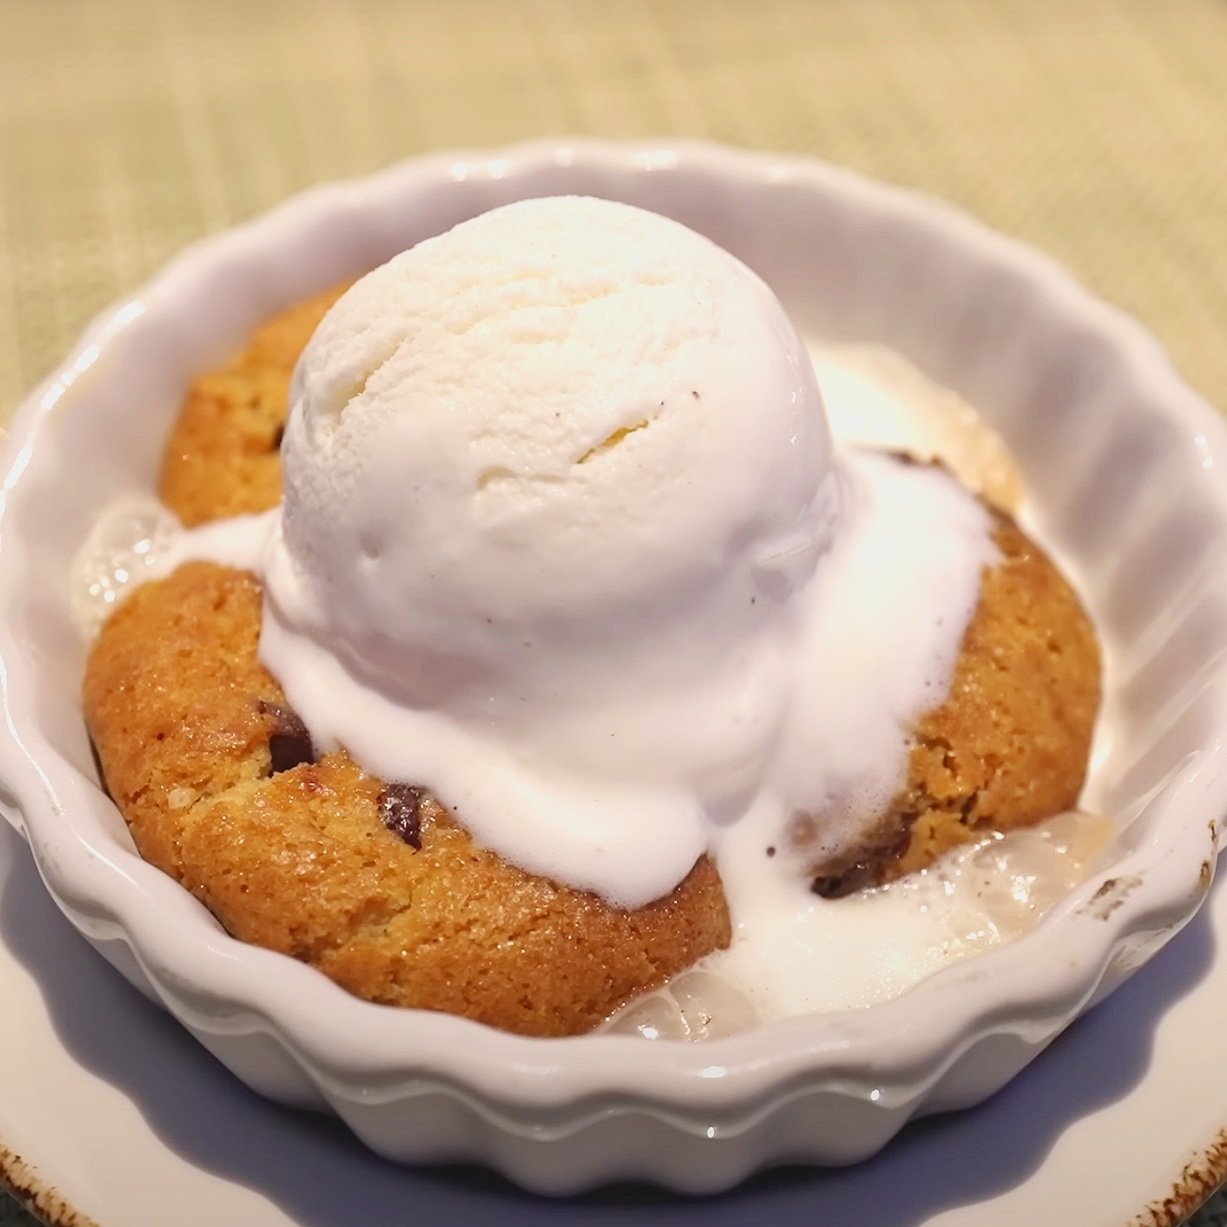  Cookie and ice-cream 